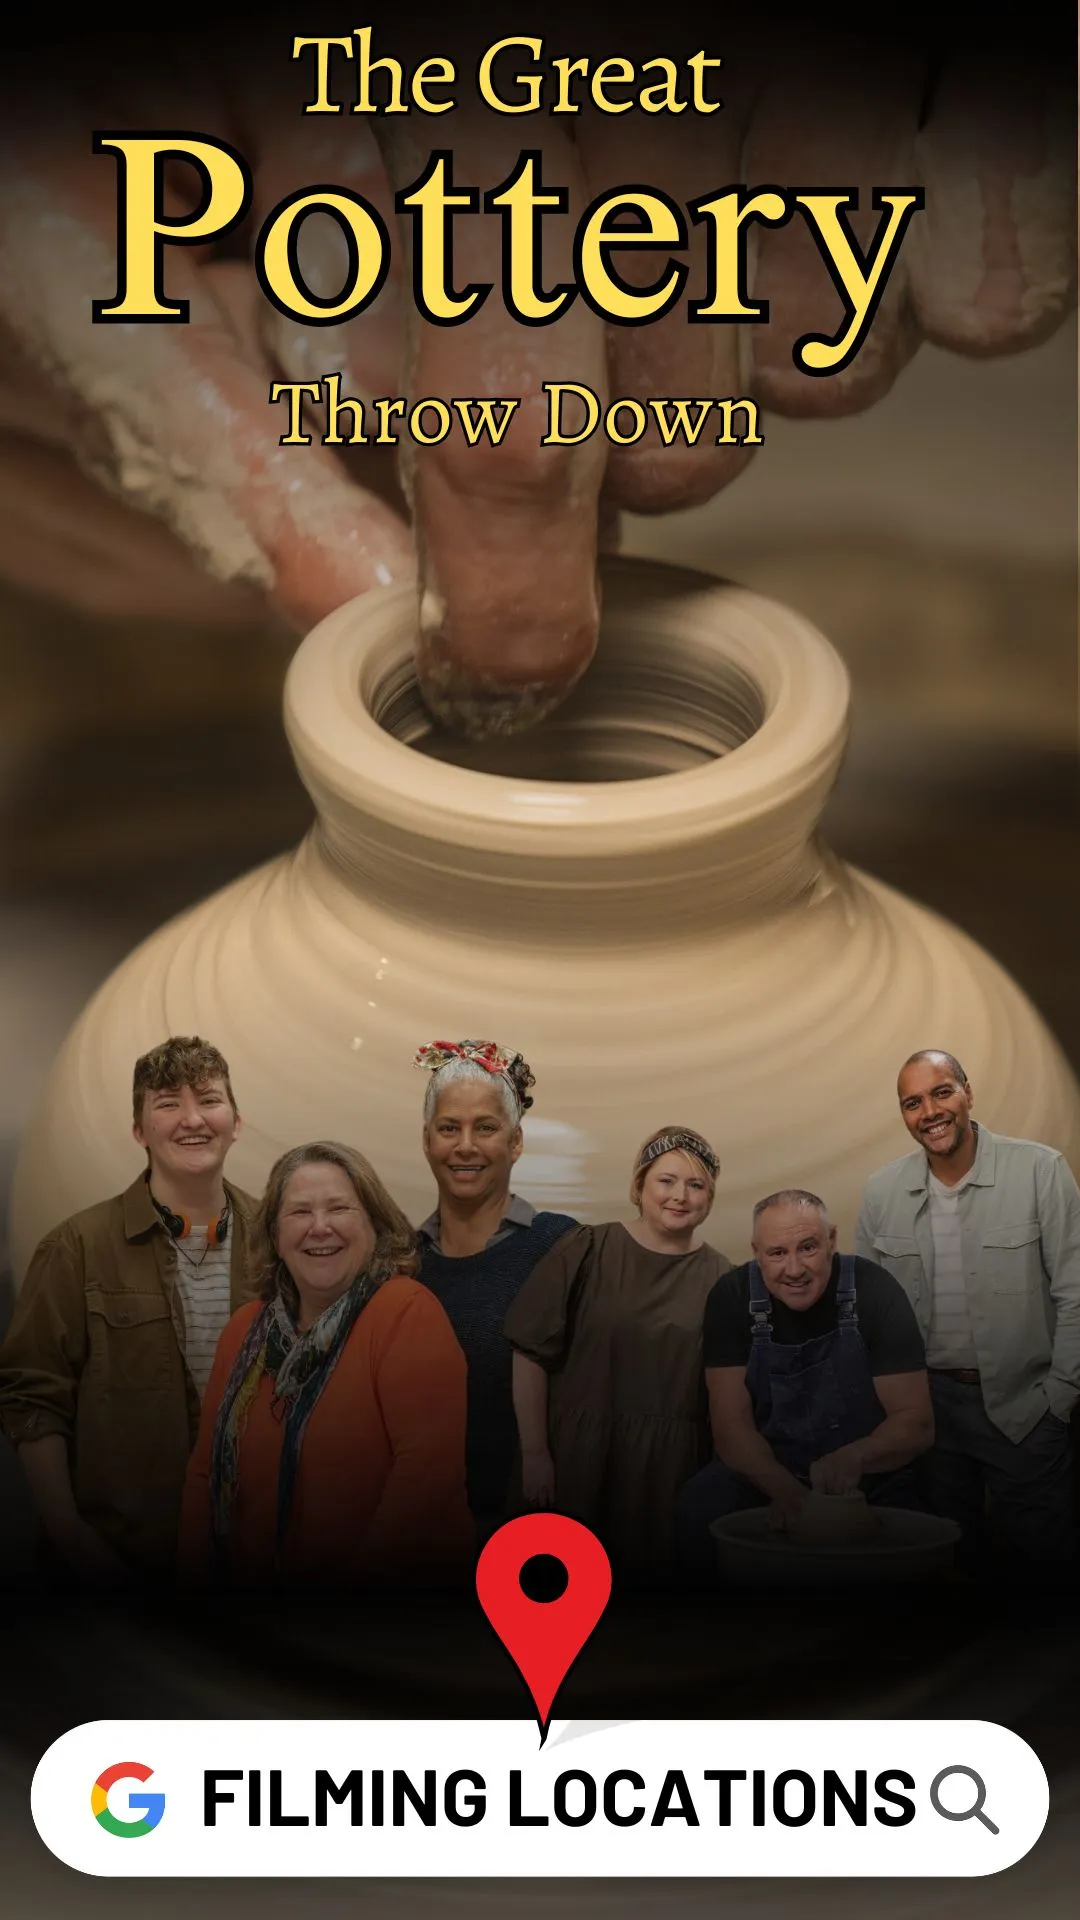 The Great Pottery Throw Down Season 7 Filming Locations